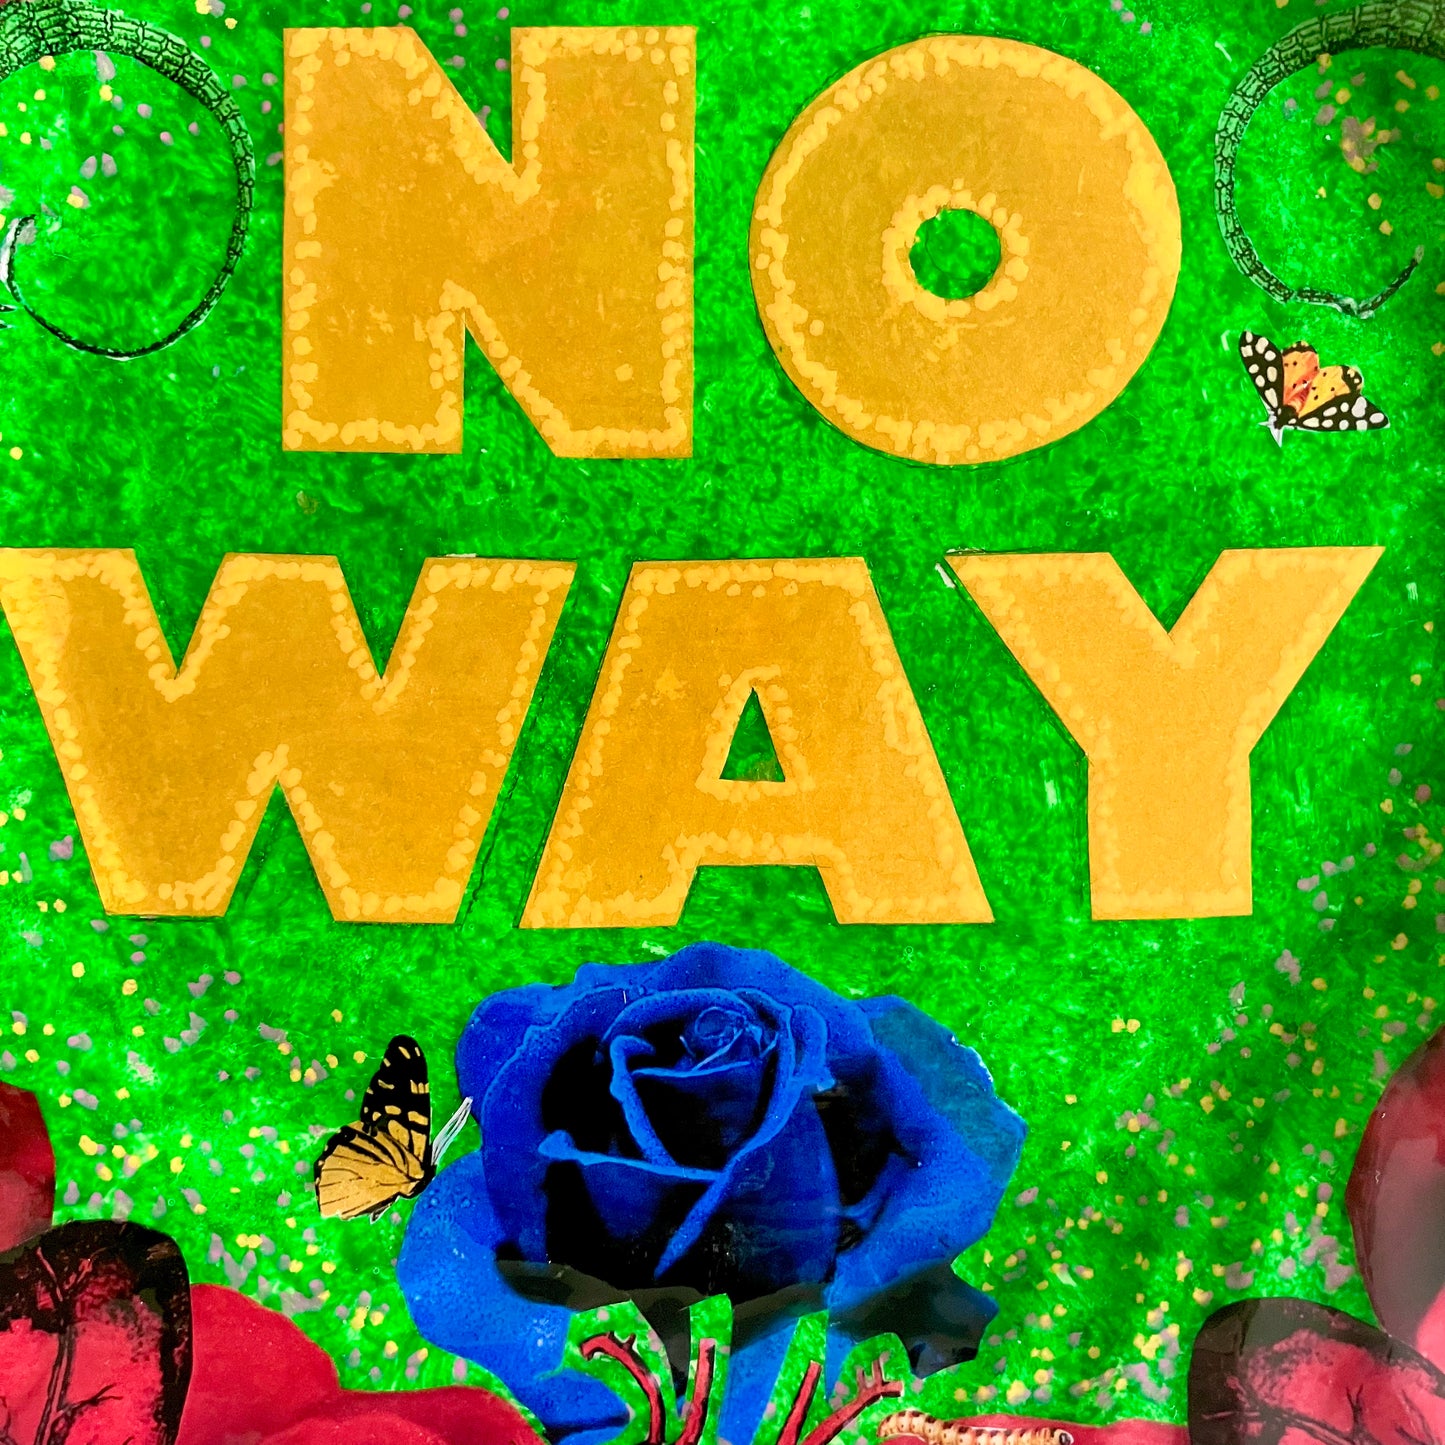 "No Way" one-of-a-kind collage artwork on upcycled wall plate by House of Frisson. Featuring the words "No Way" framed with a collage of roses, and lizards, on a green background. Closeup showing details of the collage.